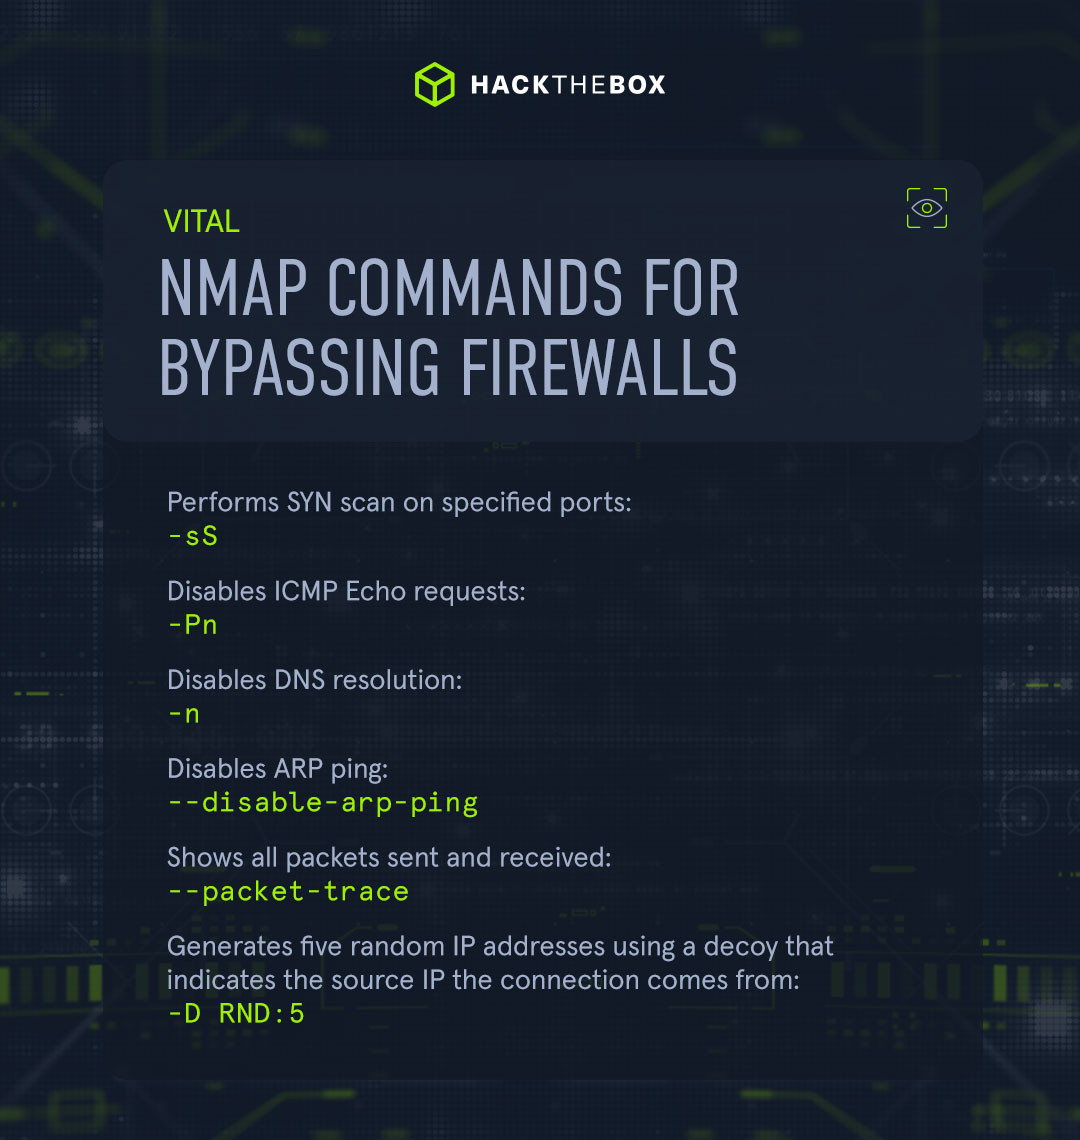 Nmap commands for bypassing firewalls